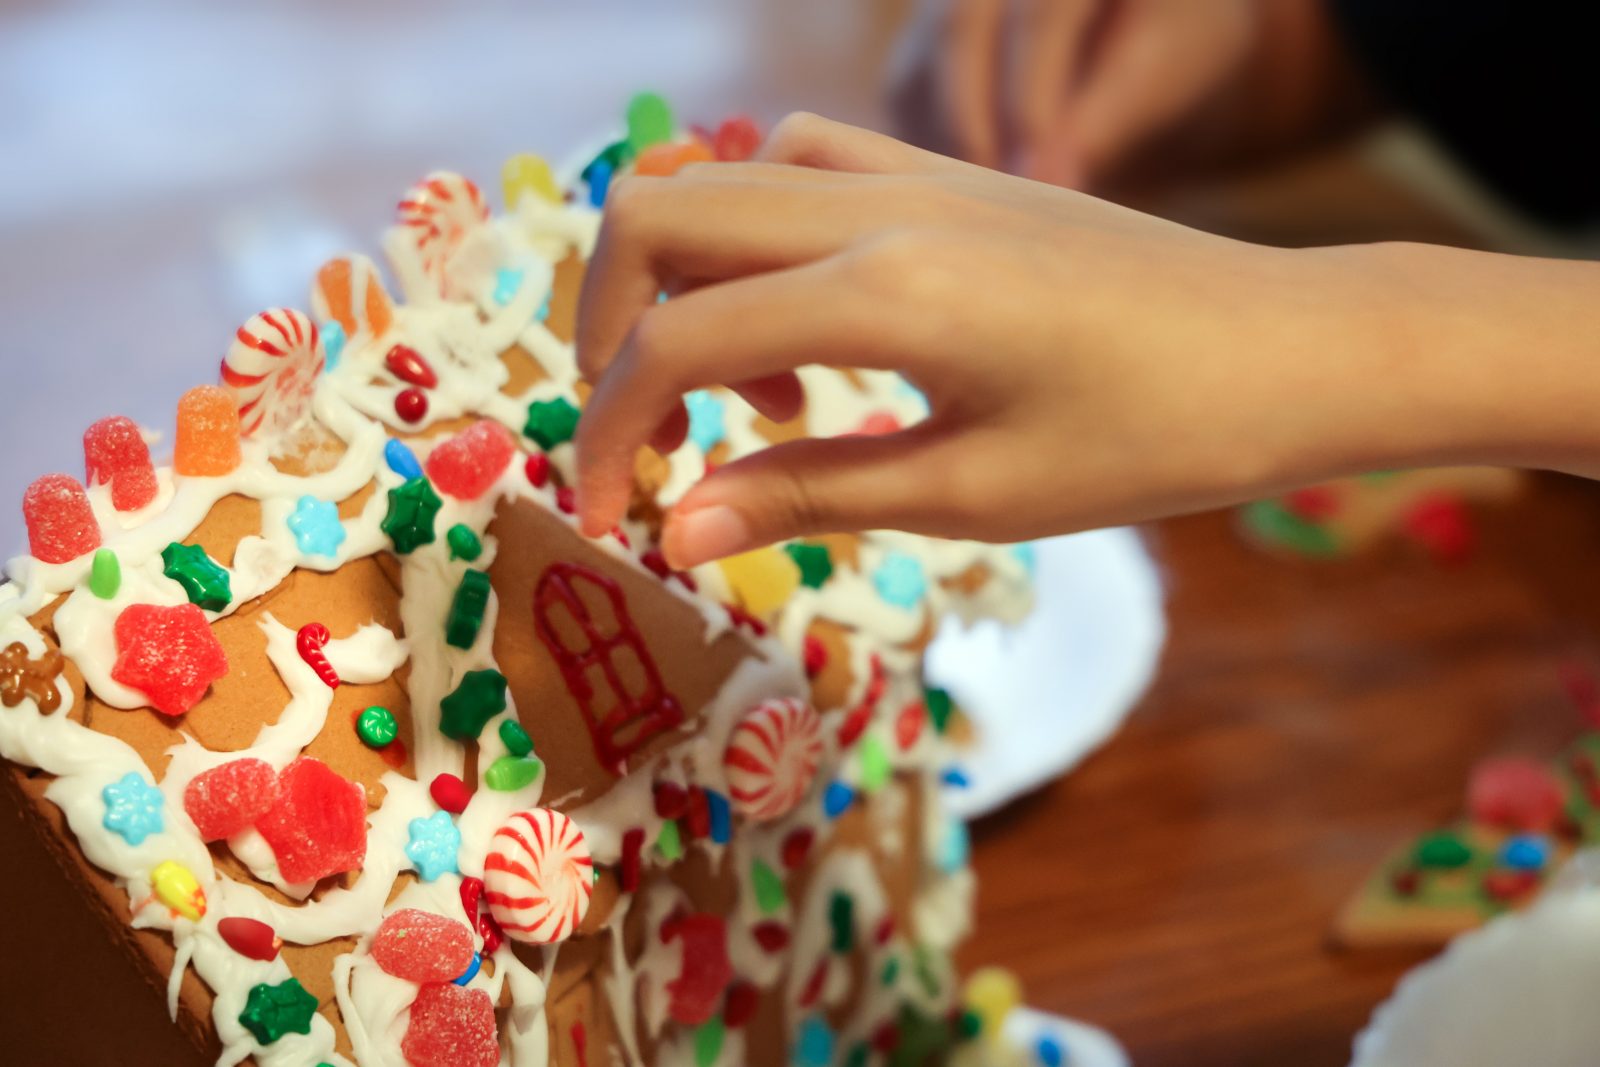 Festive Christmas Activities To Do With Your Kids